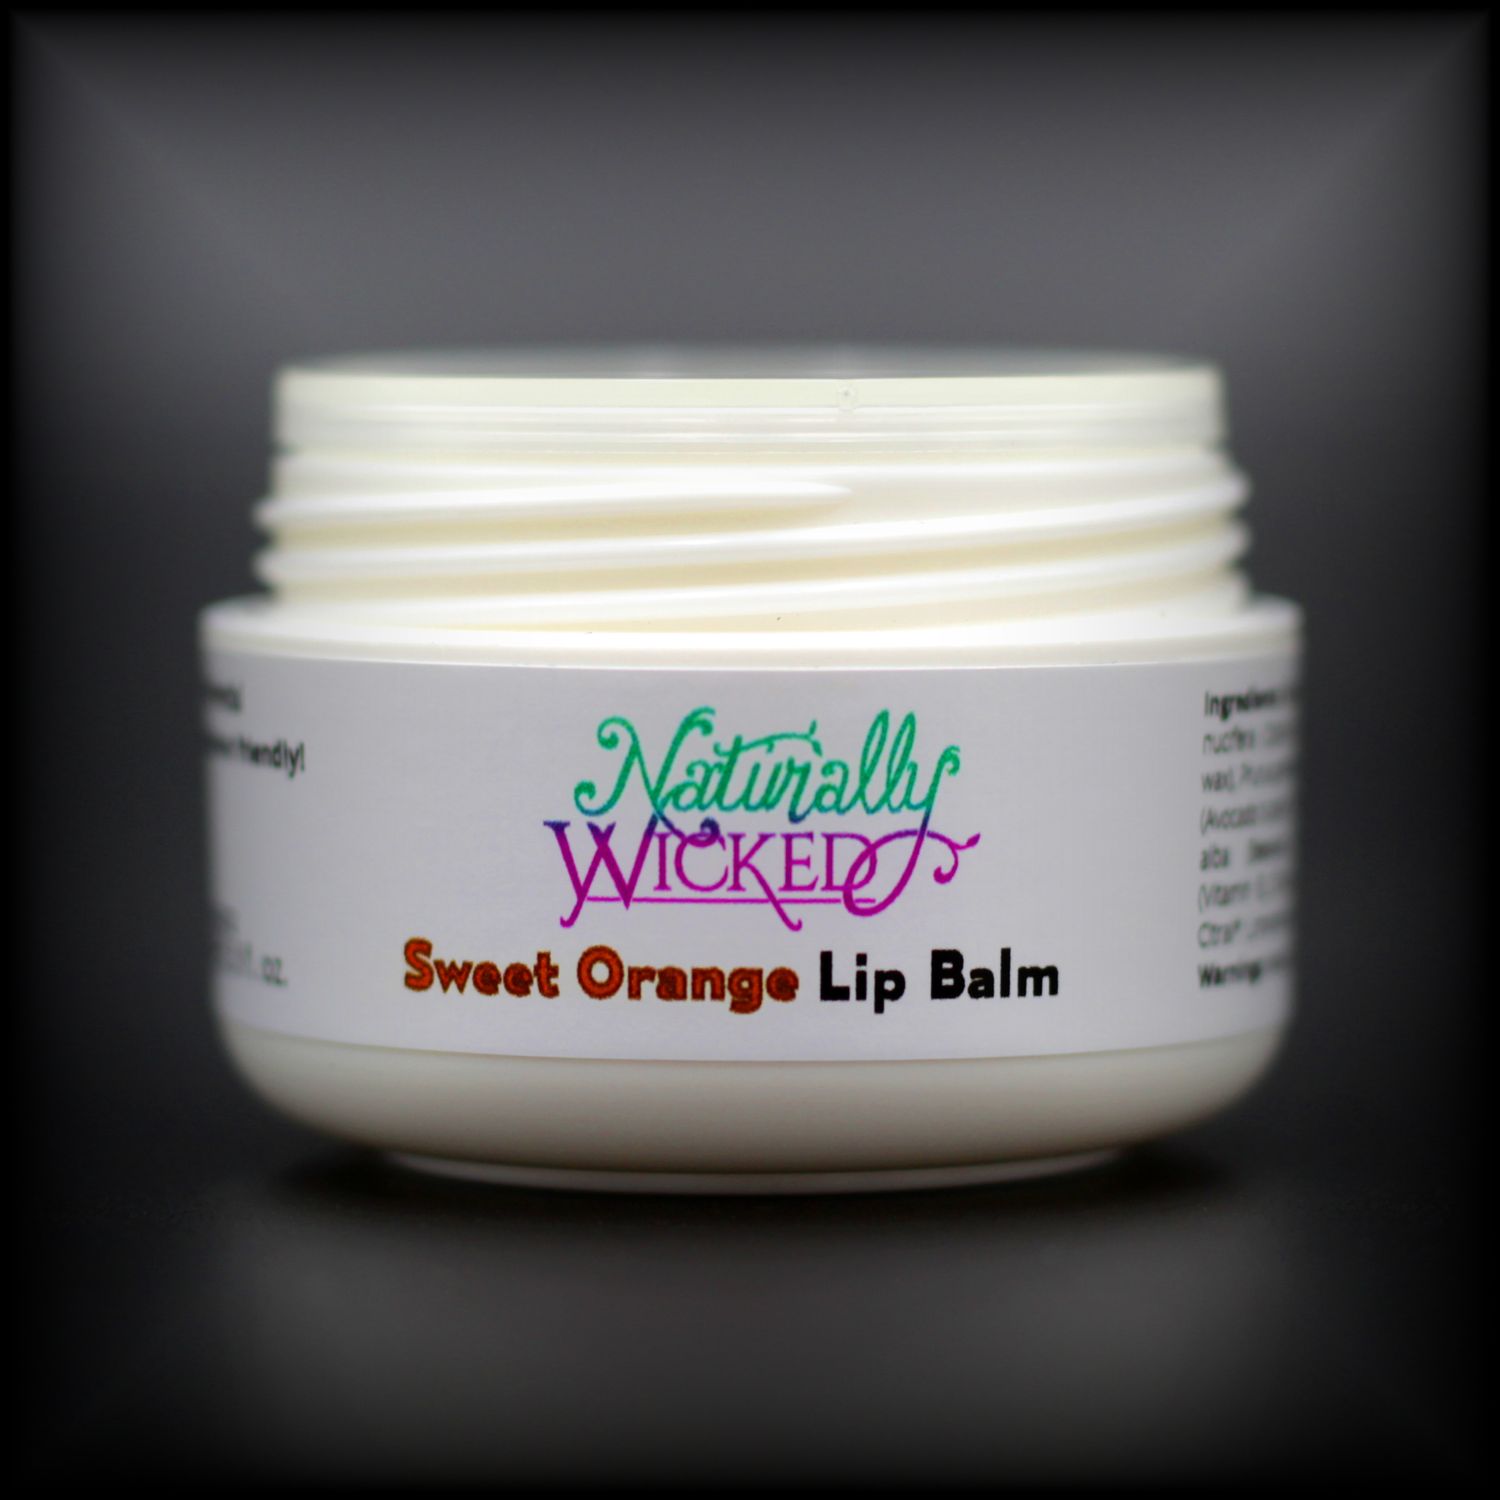 Naturally Wicked Sweet Orange Lip Balm Container Without Lid, Exposing Screwed Lid Connection & Seal